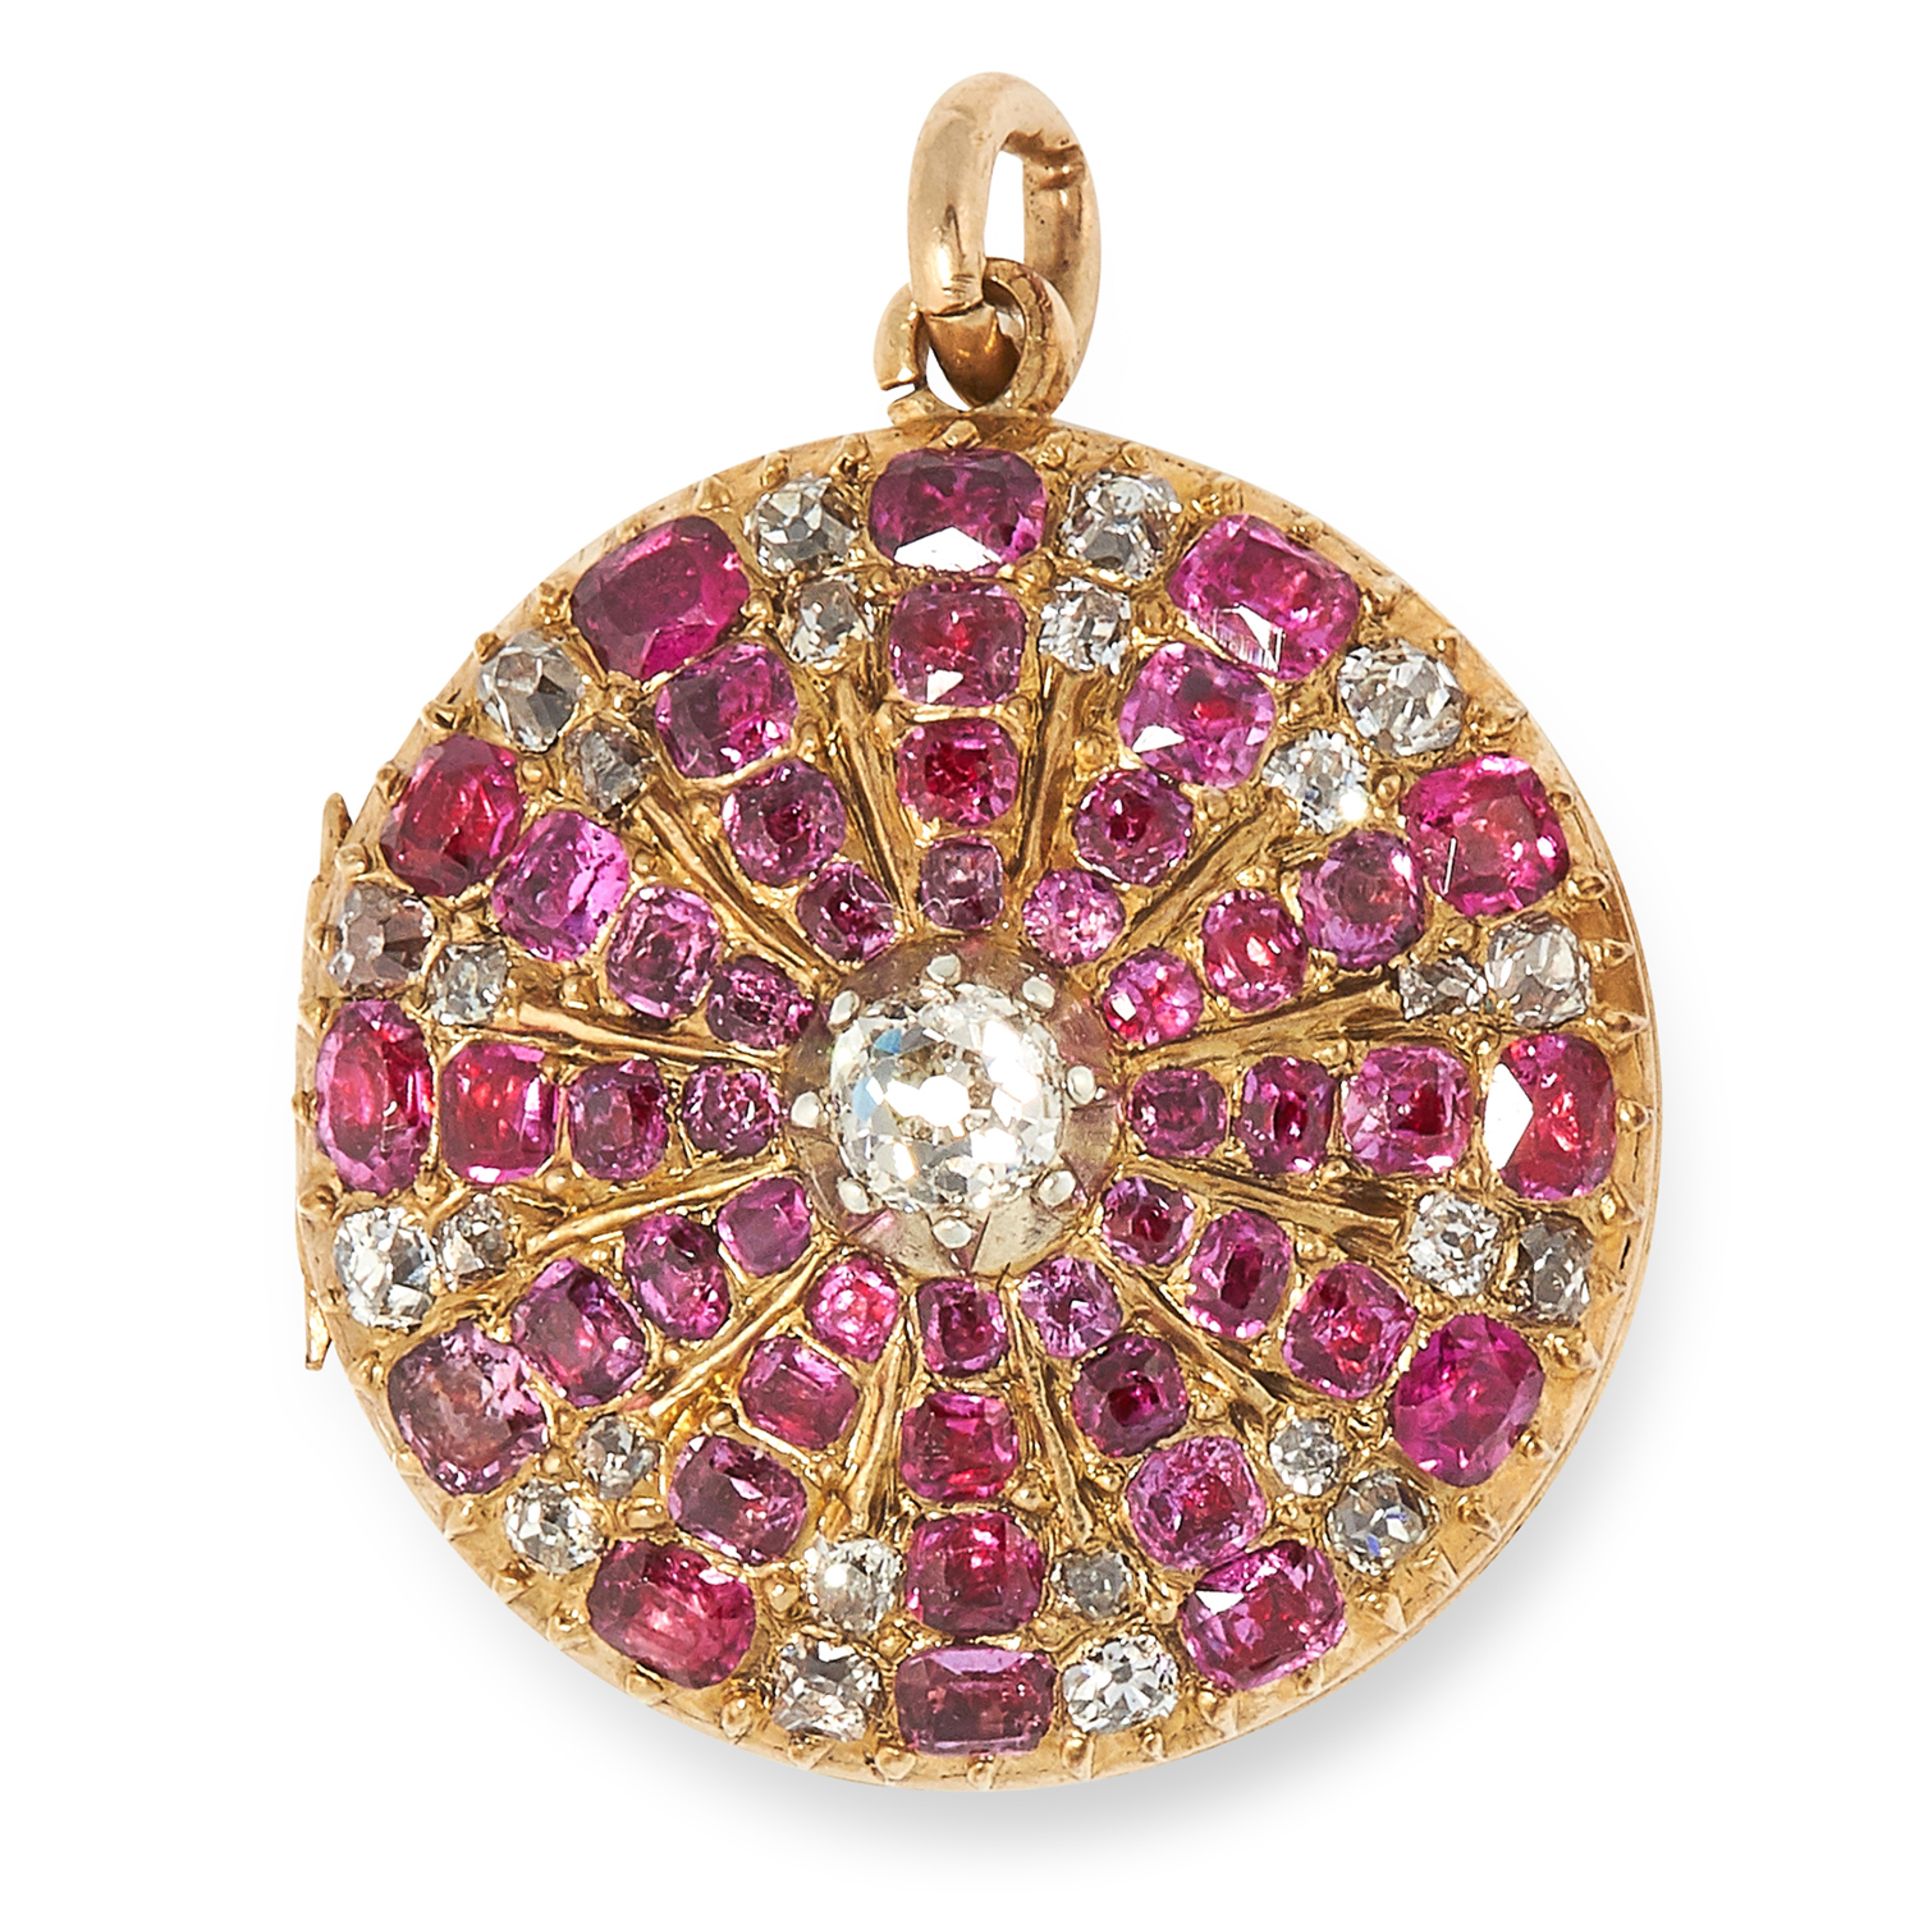 ANTIQUE RUBY AND DIAMOND MOURNING HAIRWORK PENDANT / LOCKET set with cushion cut rubies and old